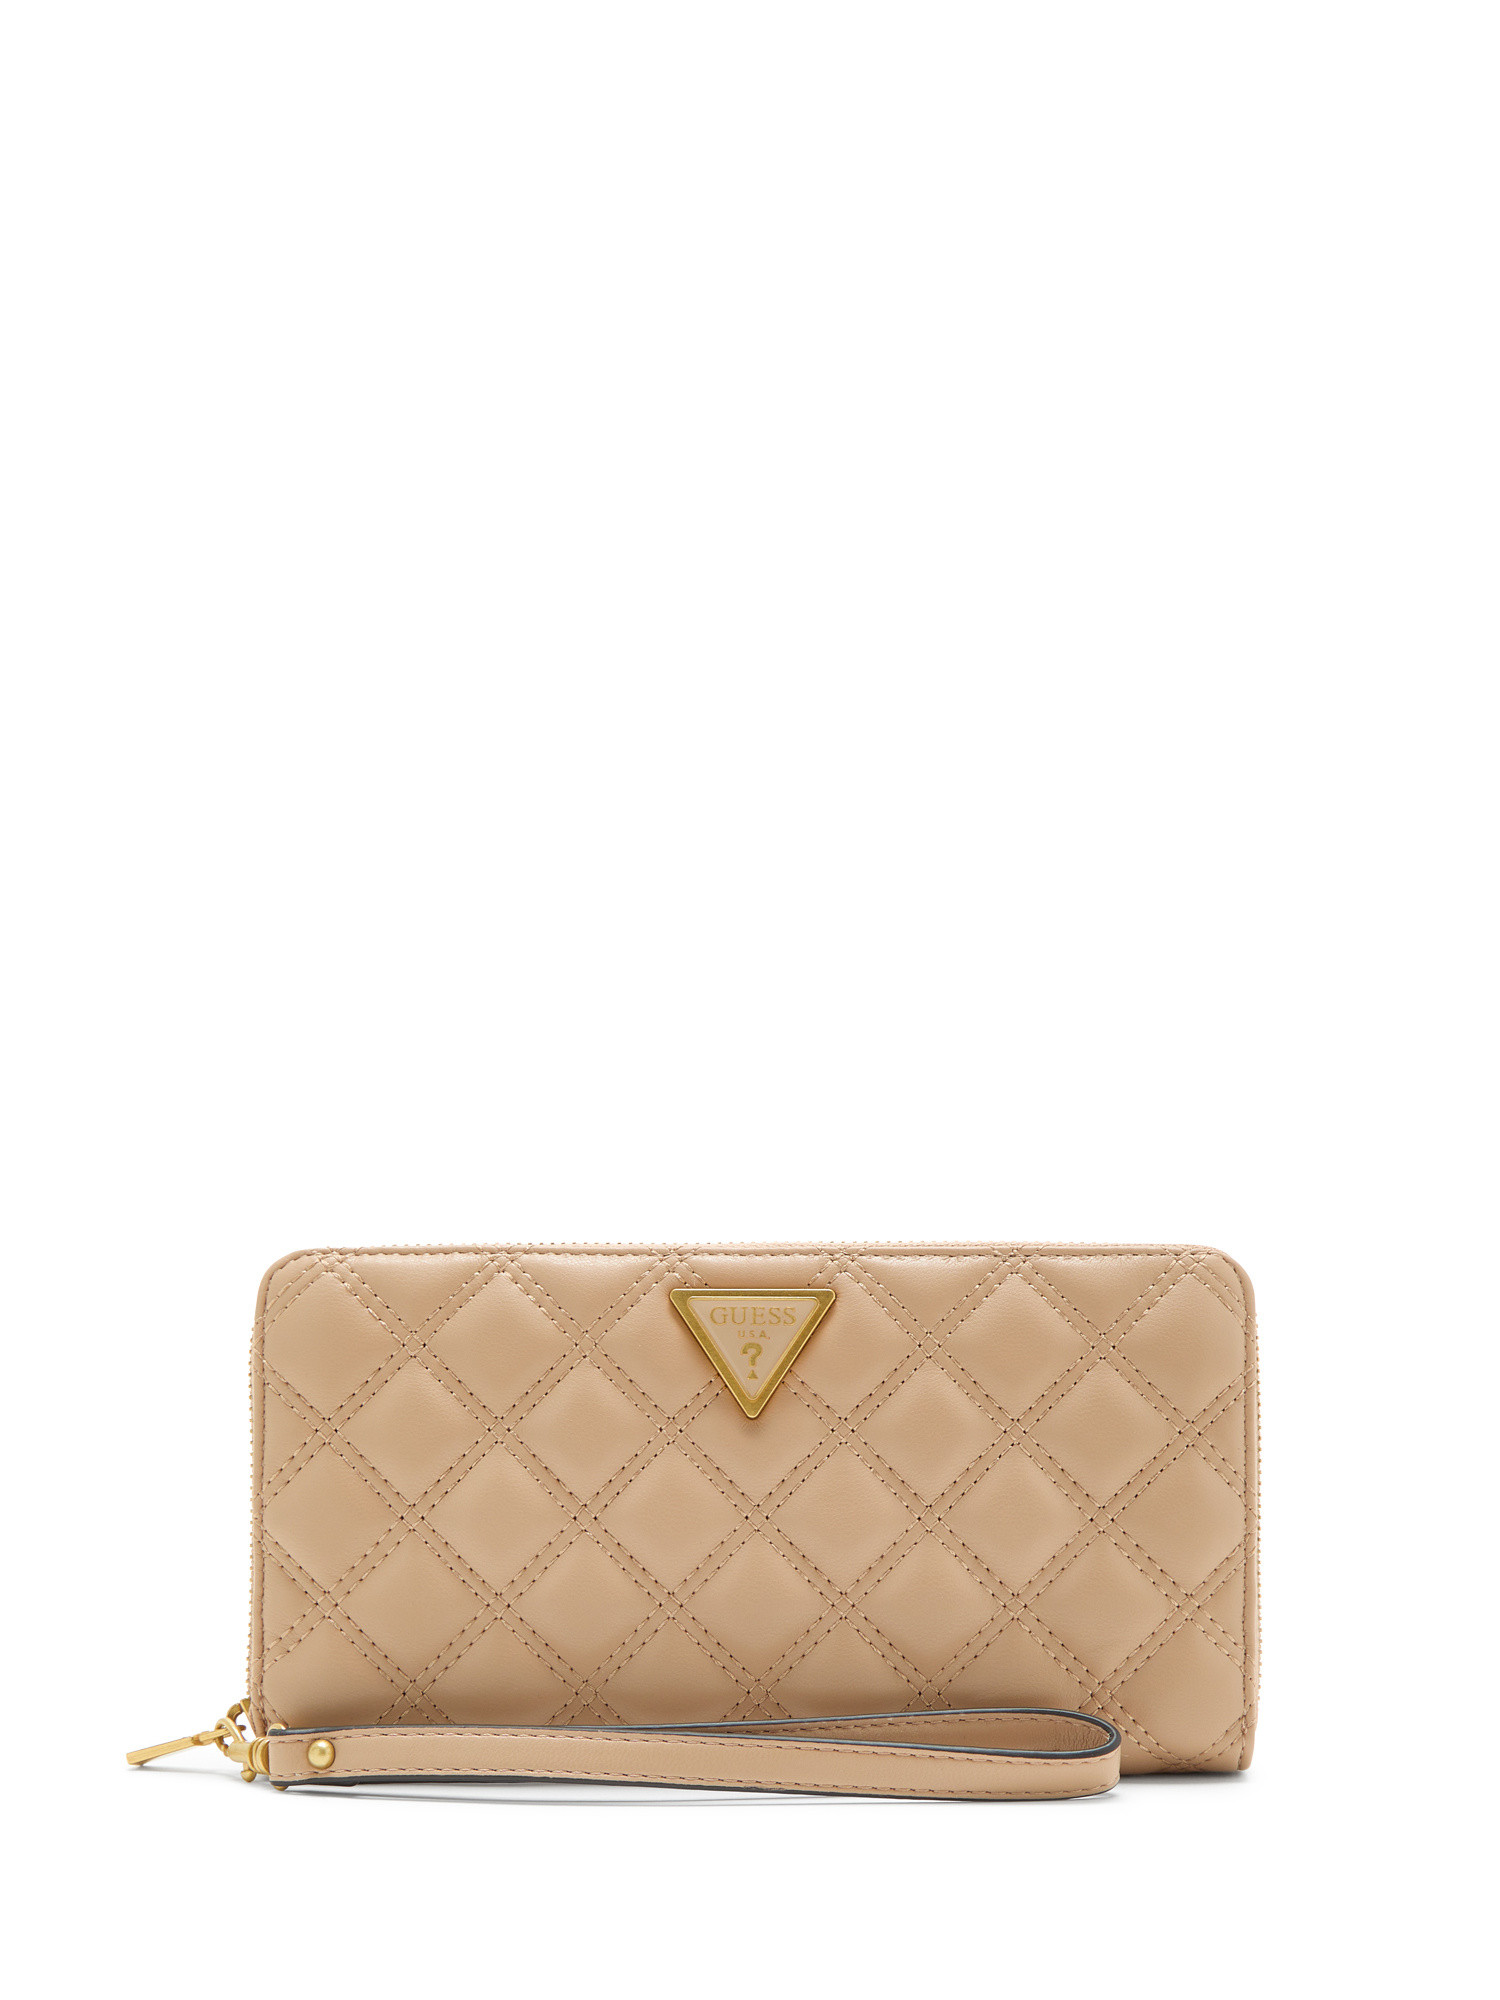 Guess - Giully maxi wallet, Beige, large image number 0